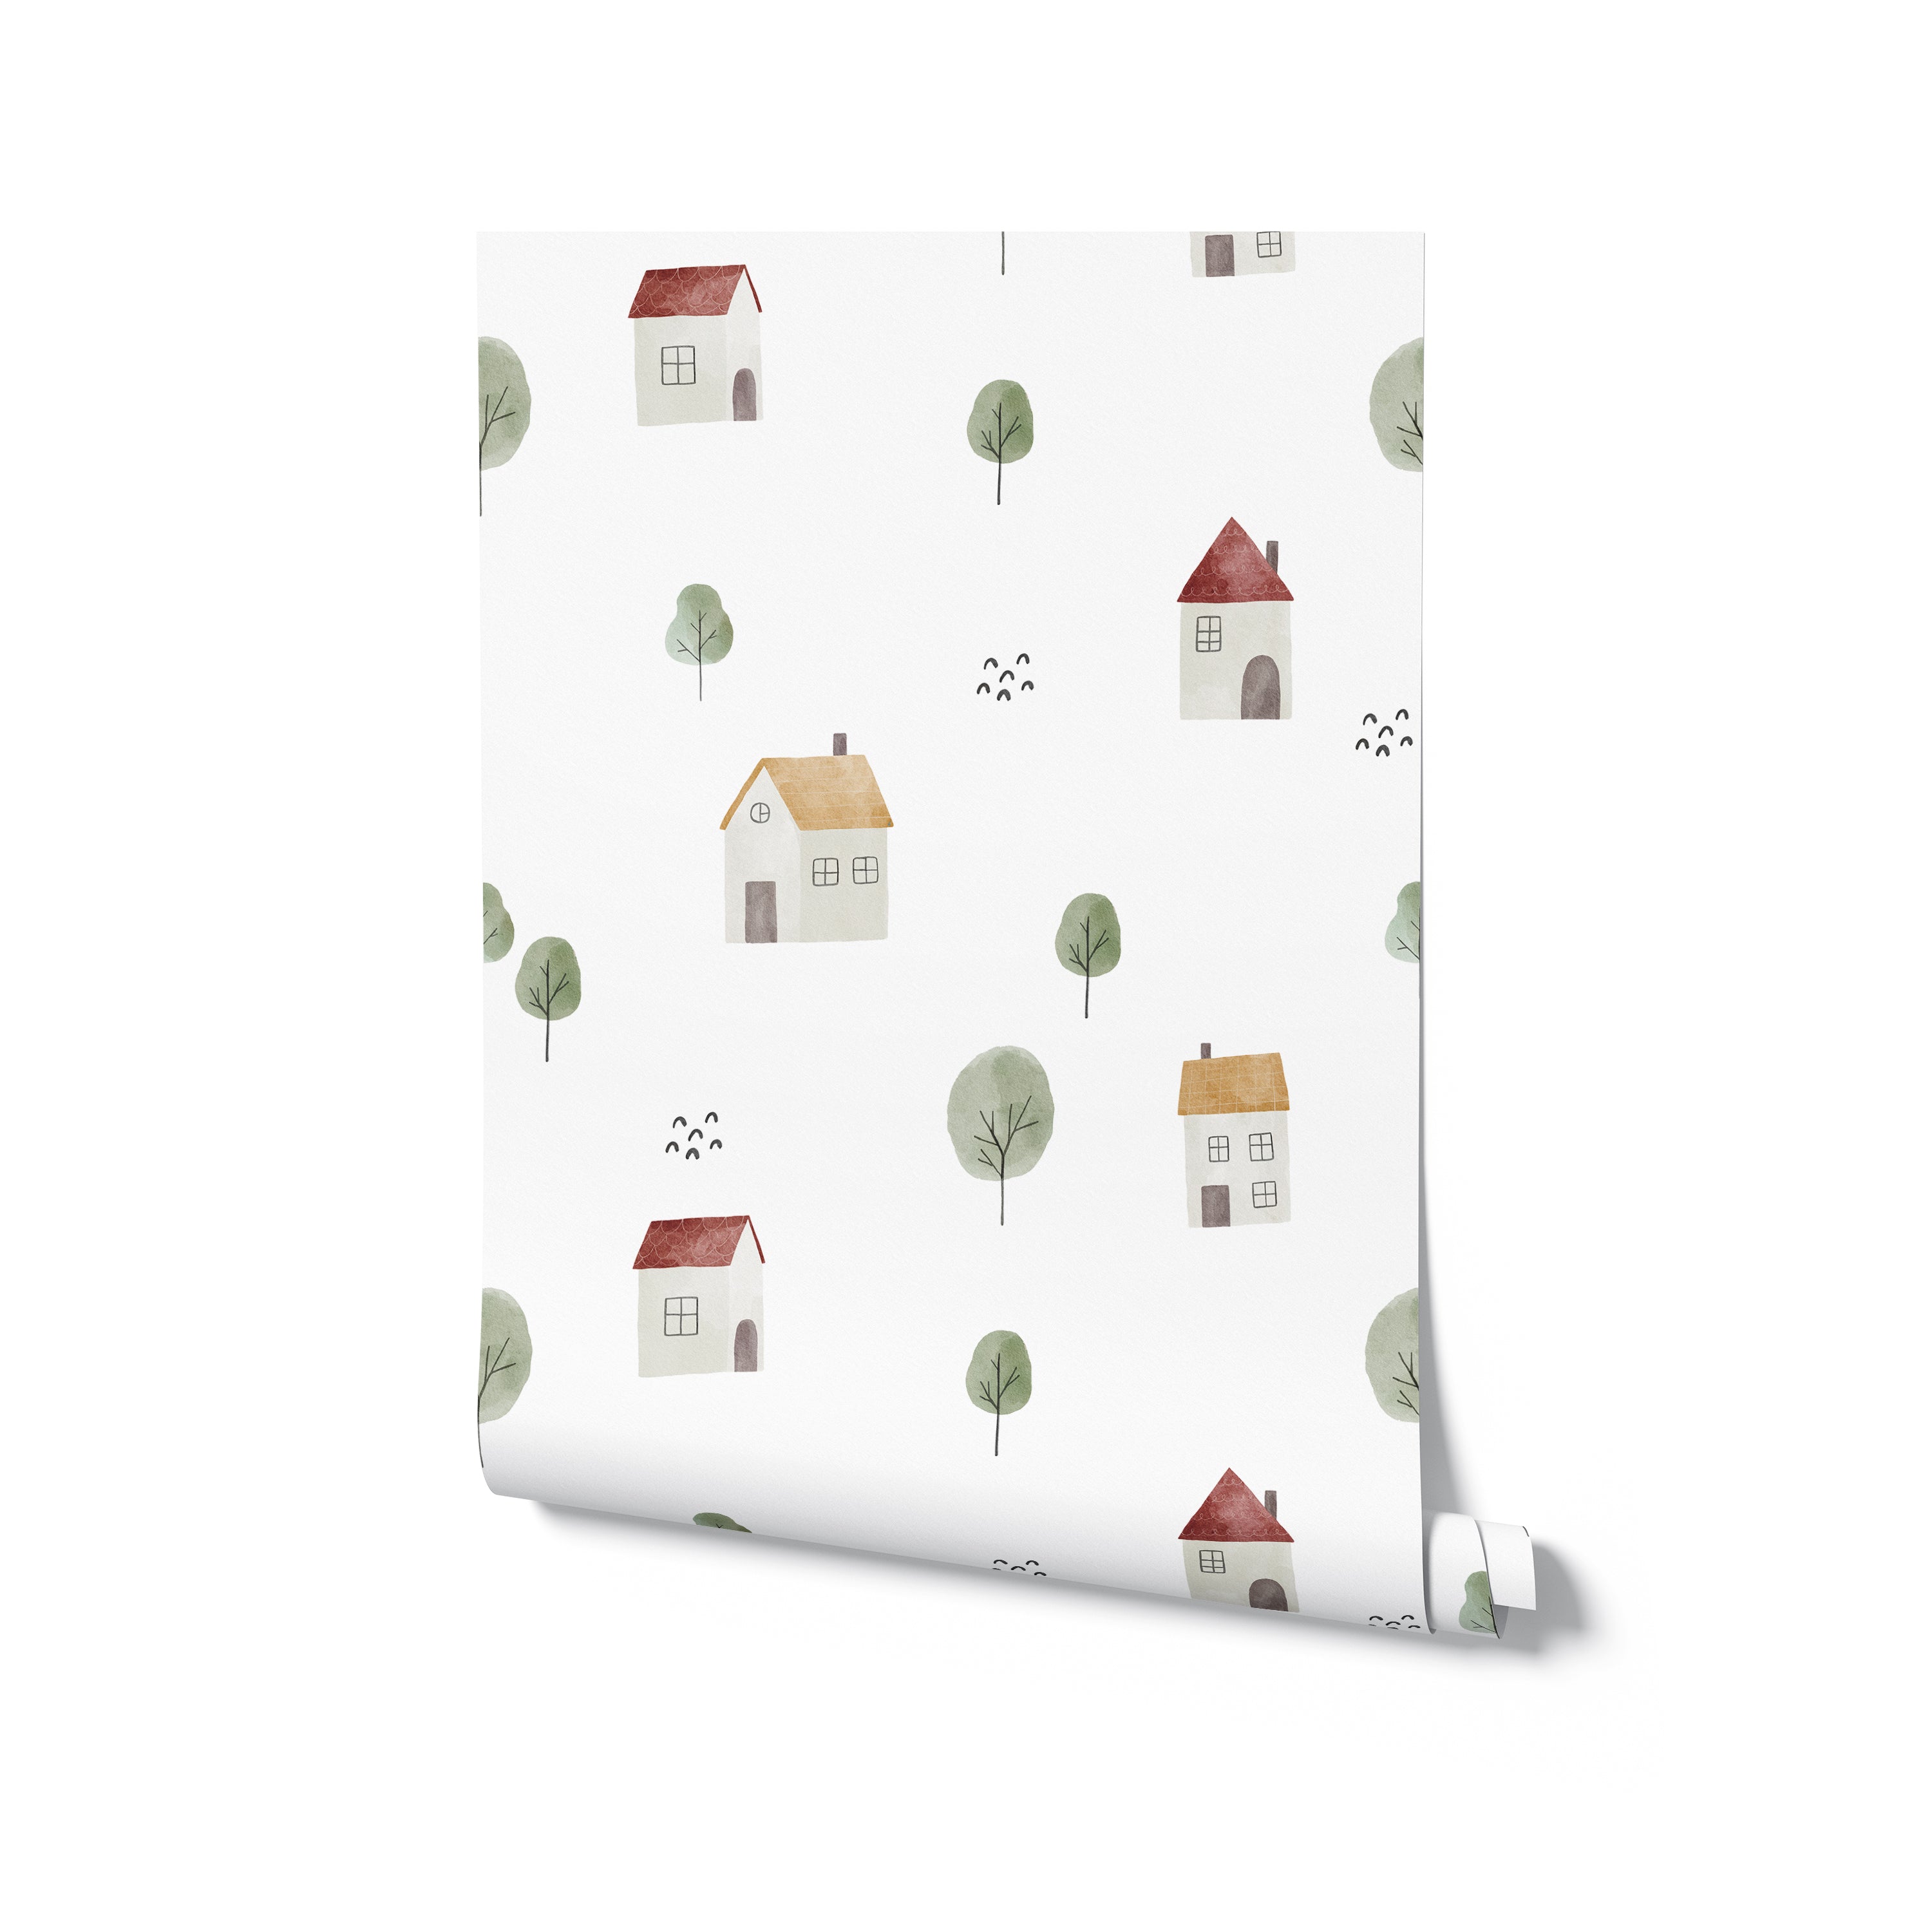 A roll of Farm Friend Wallpaper - Happy House, showing a delightful pattern of houses with red and yellow roofs, green trees, and small birds, perfect for adding a fun and whimsical touch to any room.